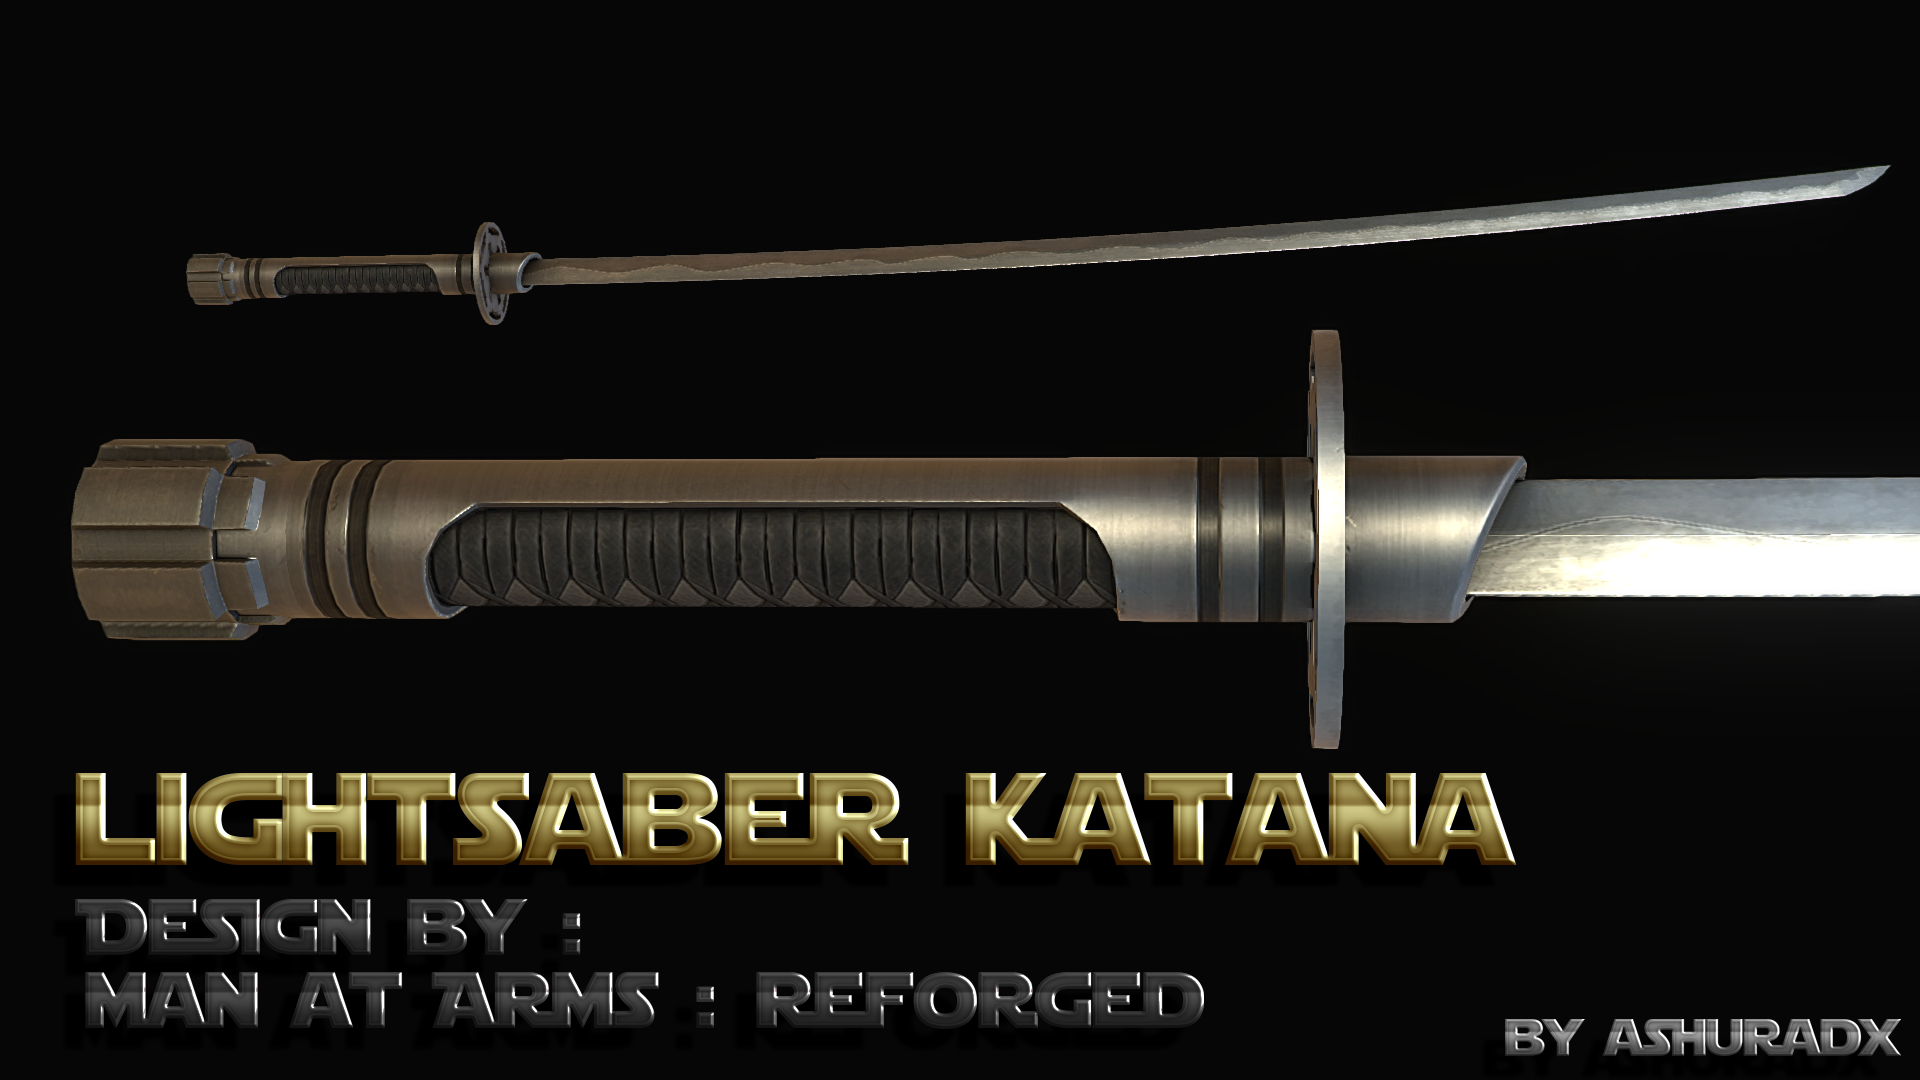 More information about "Lightsaber Katana - MAN AT ARMS Style"